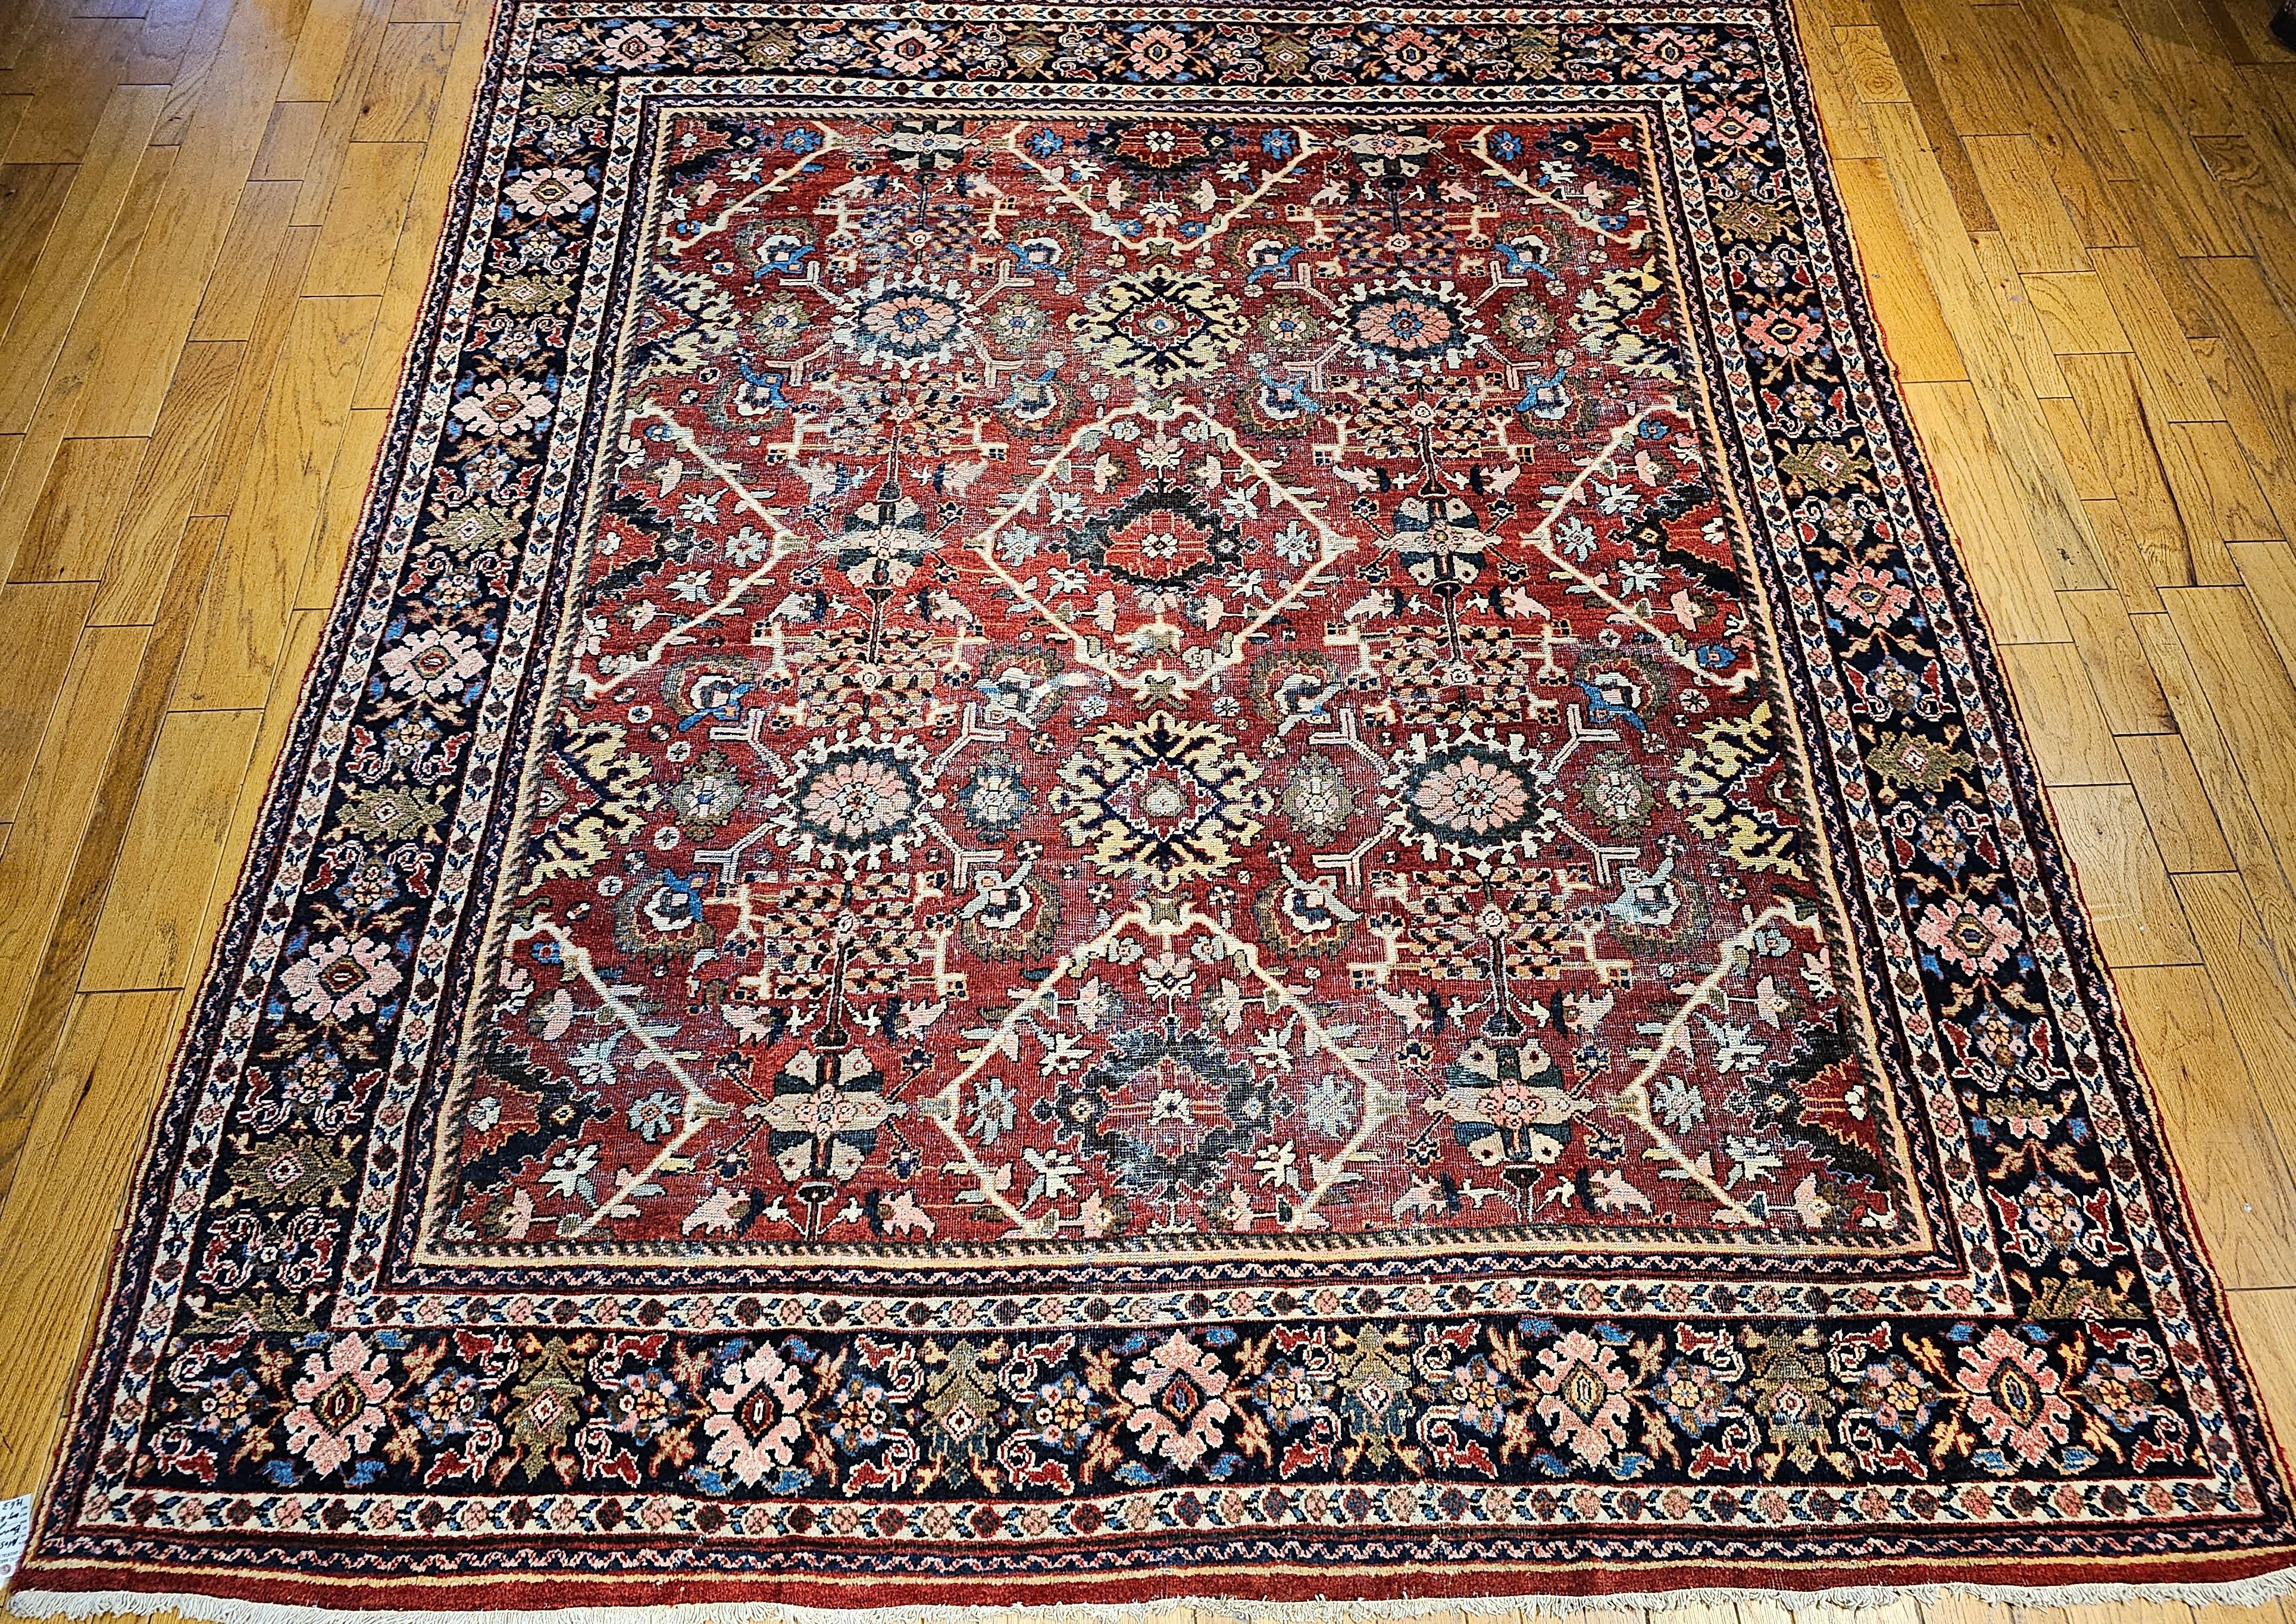 Vintage  Persian Mahal Sultanabad rug in an allover pattern in dark red and navy blue from the late 1800s.   It has an all-over design that consists of large geometric forms in beautiful bright colors of red, blue, pink, green, brown, and yellow set